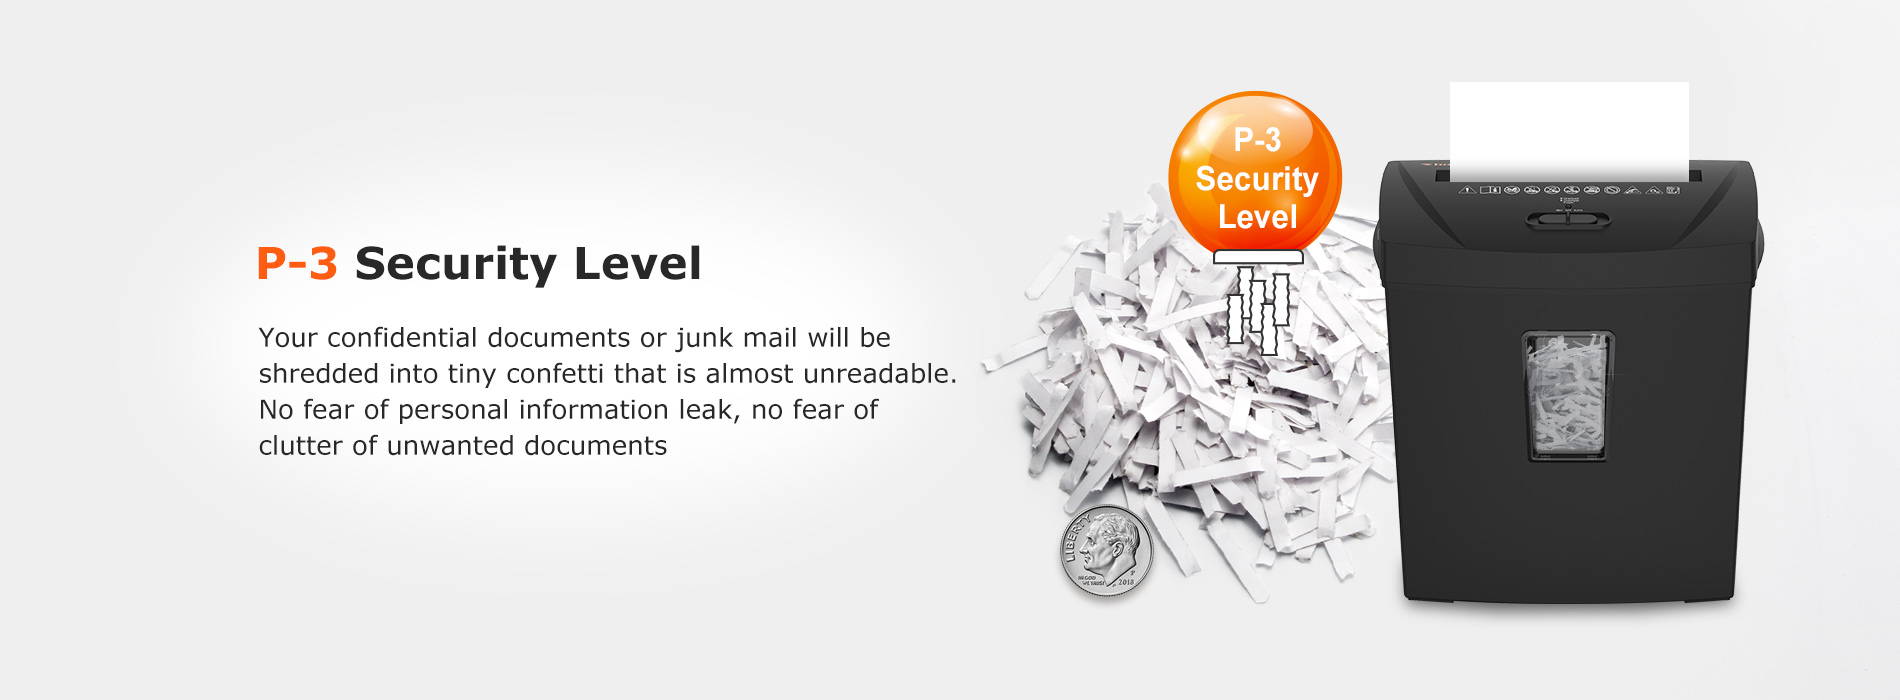 P-3 Security Level Your confidential documents or junk mail will be shredded into tiny confetti that is almost unreadable. No fear of personal information leak, no fear of clutter of unwanted documents